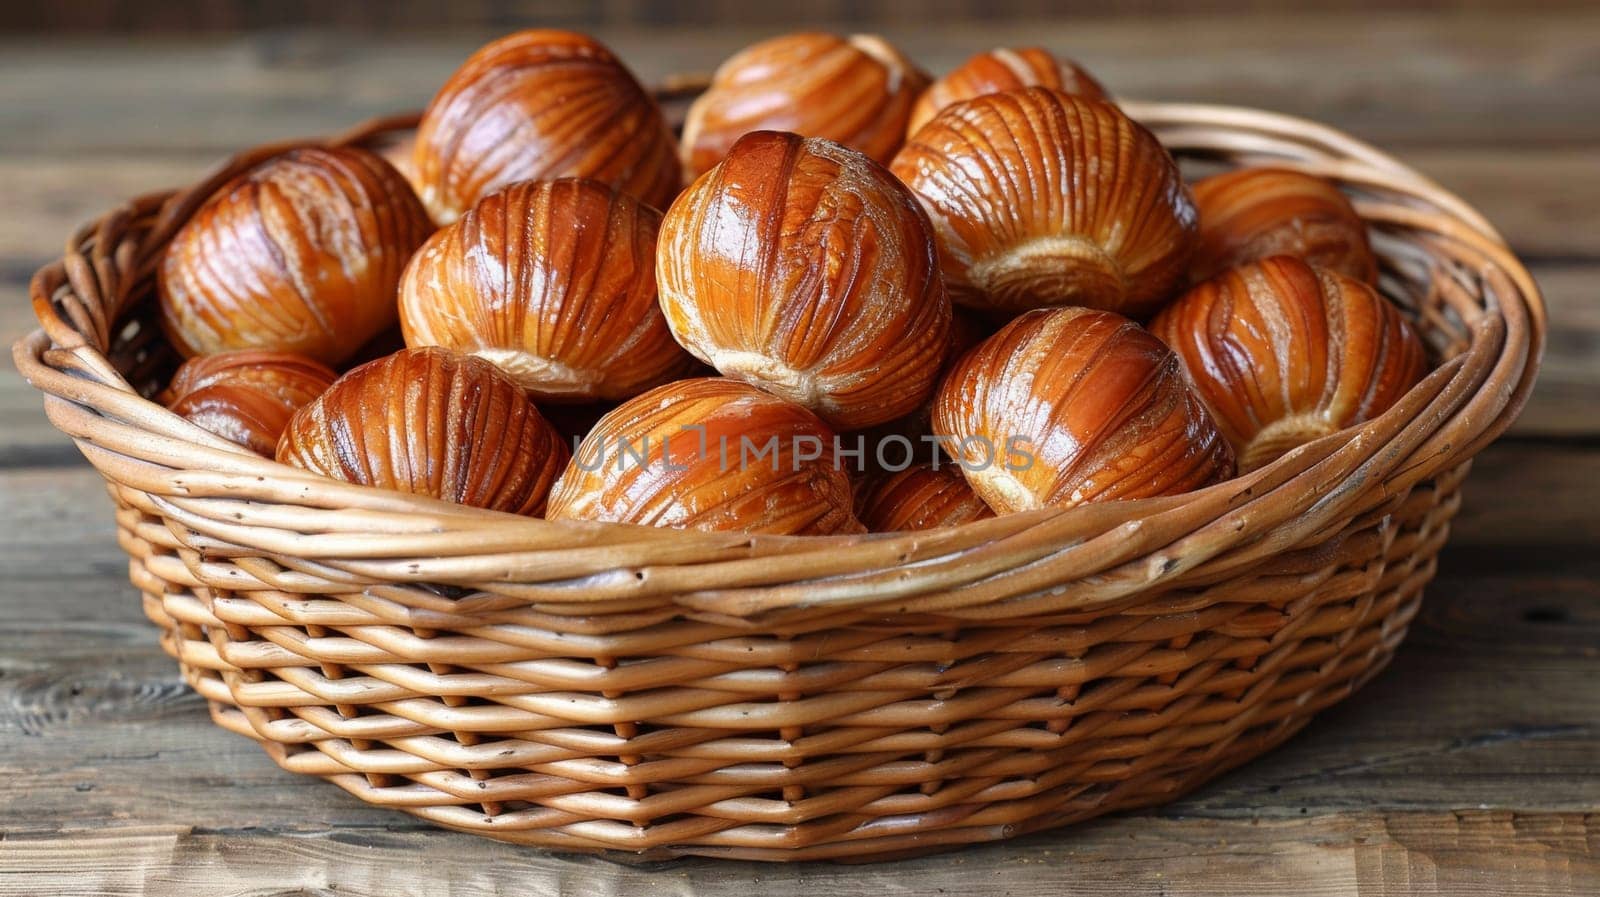 A basket of nuts in a wooden bowl on top of the table